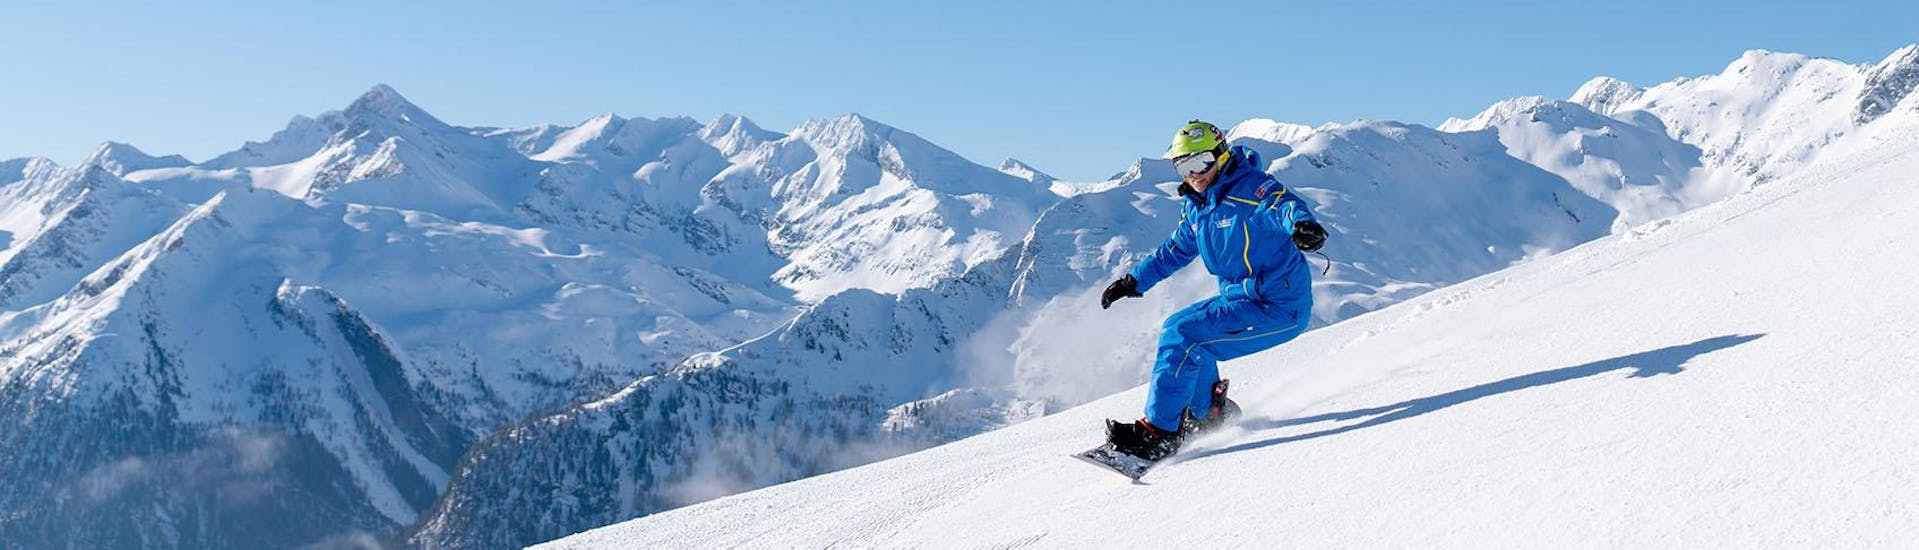 private-snowboarding-lessons-for-kids-and-adults-of-all-levels-bad-hofgastein-hero